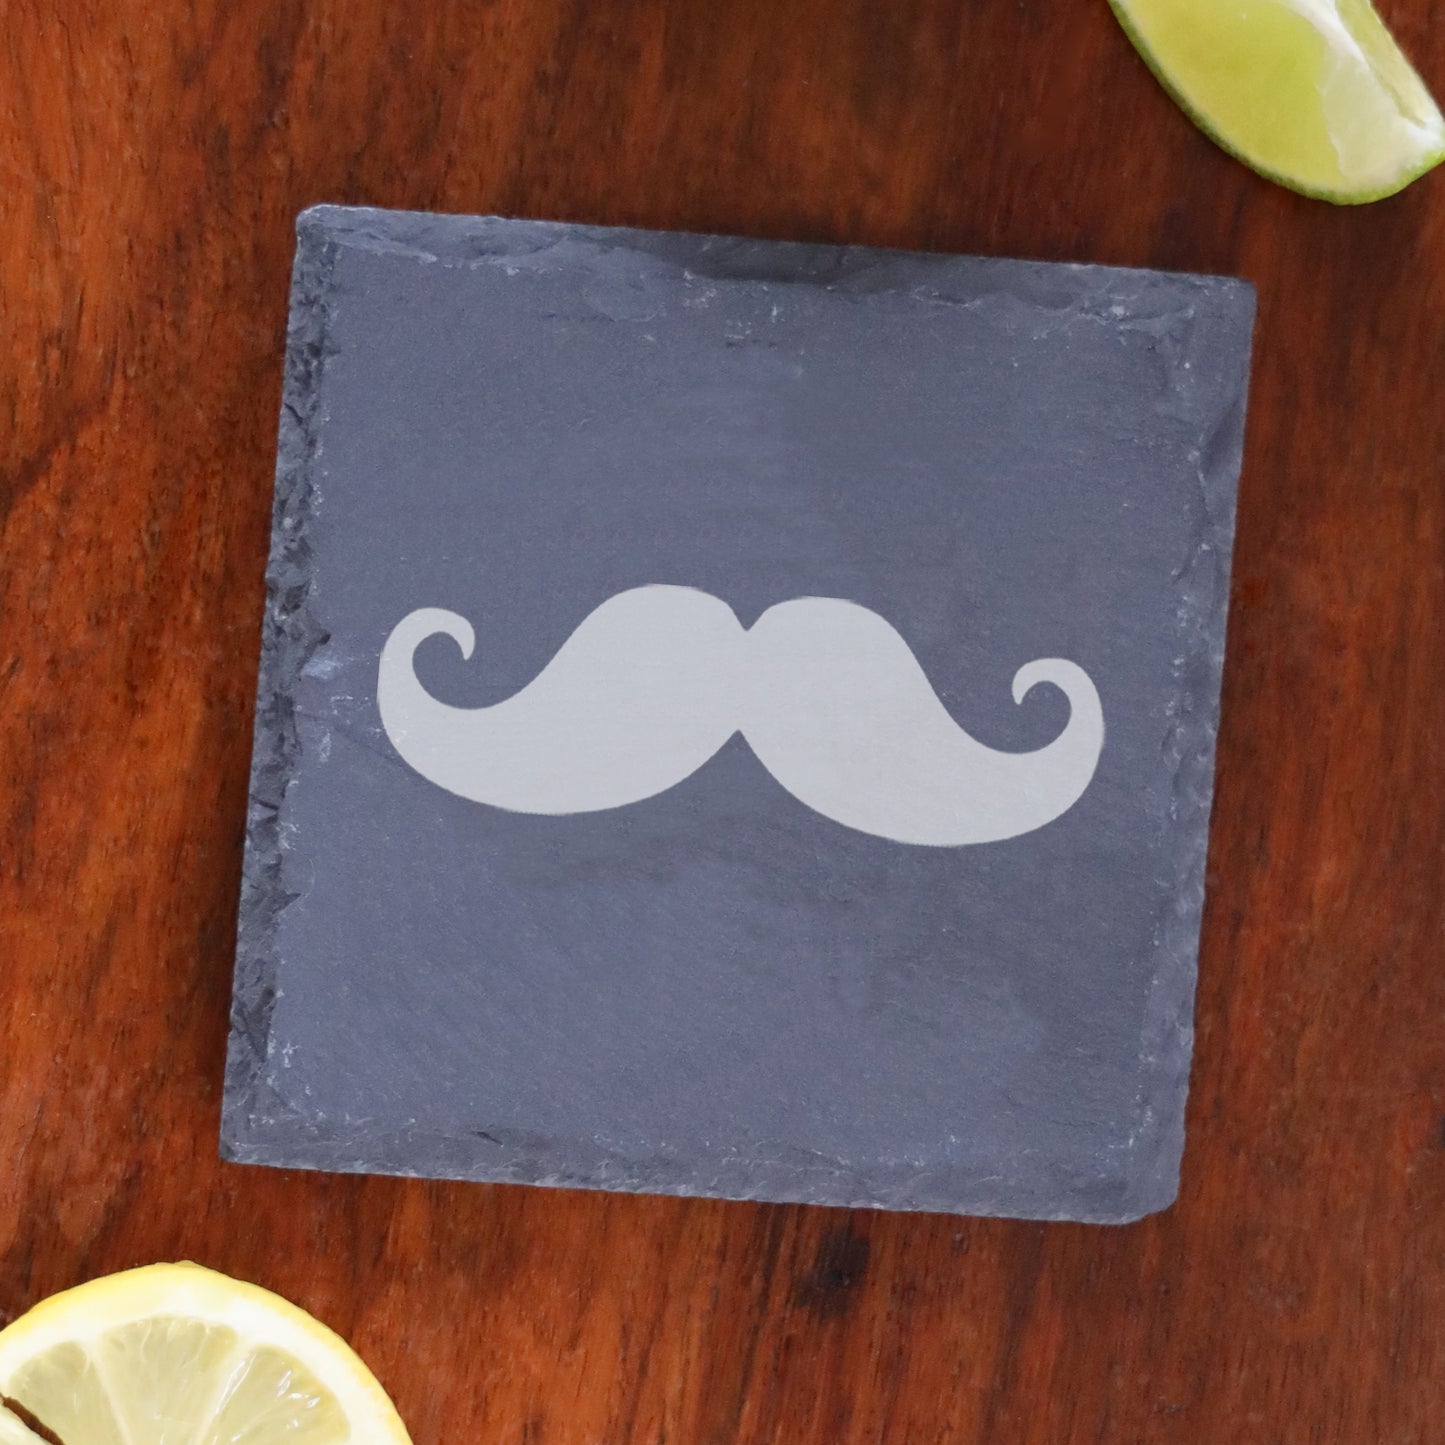 Engraved Funny Gift for Men Moustache Whisky Glass and/or Coaster Set  - Always Looking Good - Square Coaster Only  